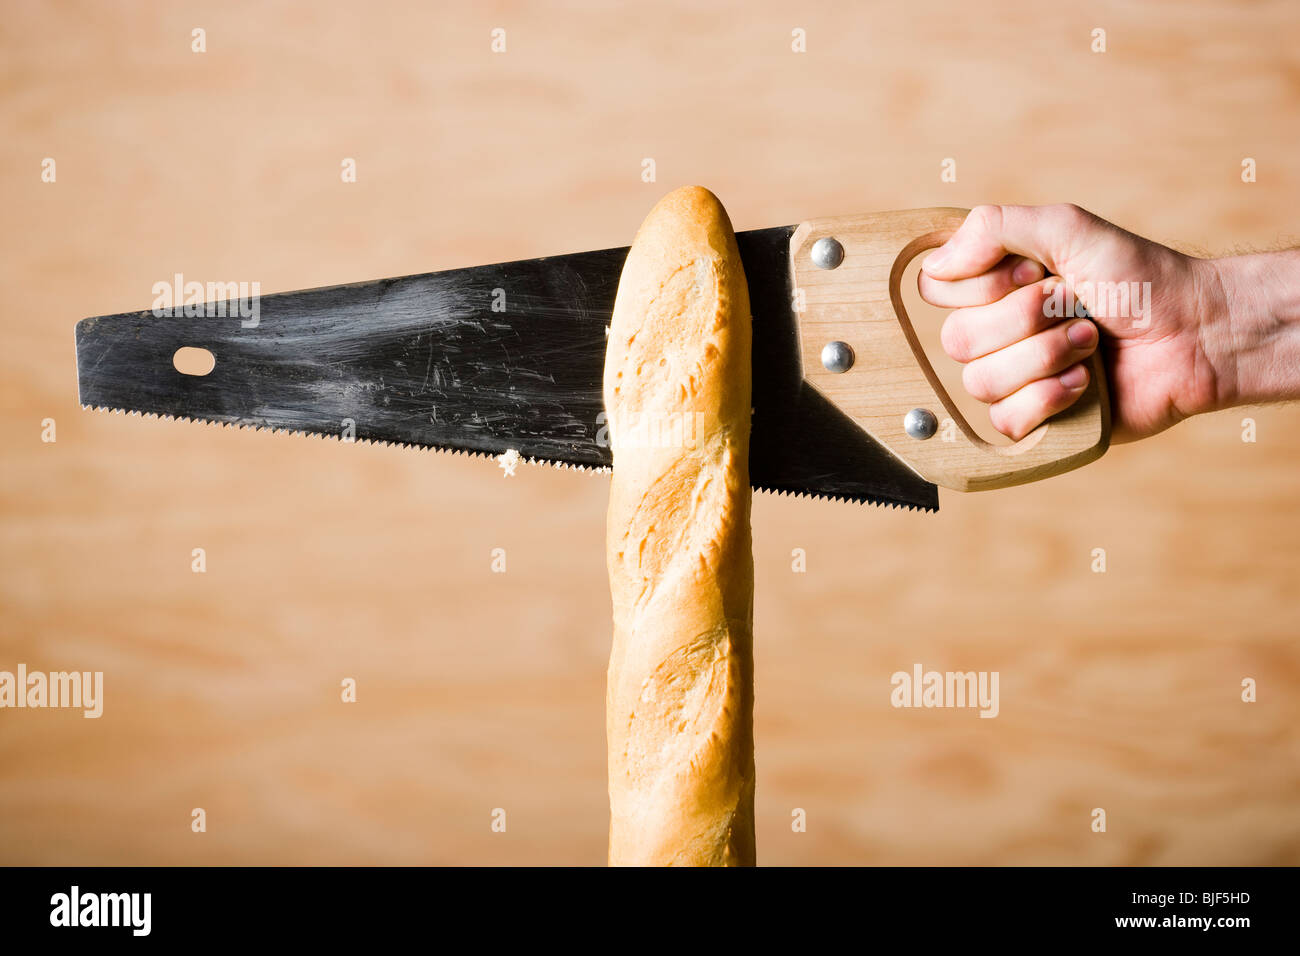 hand sawing a loaf of french bread Stock Photo